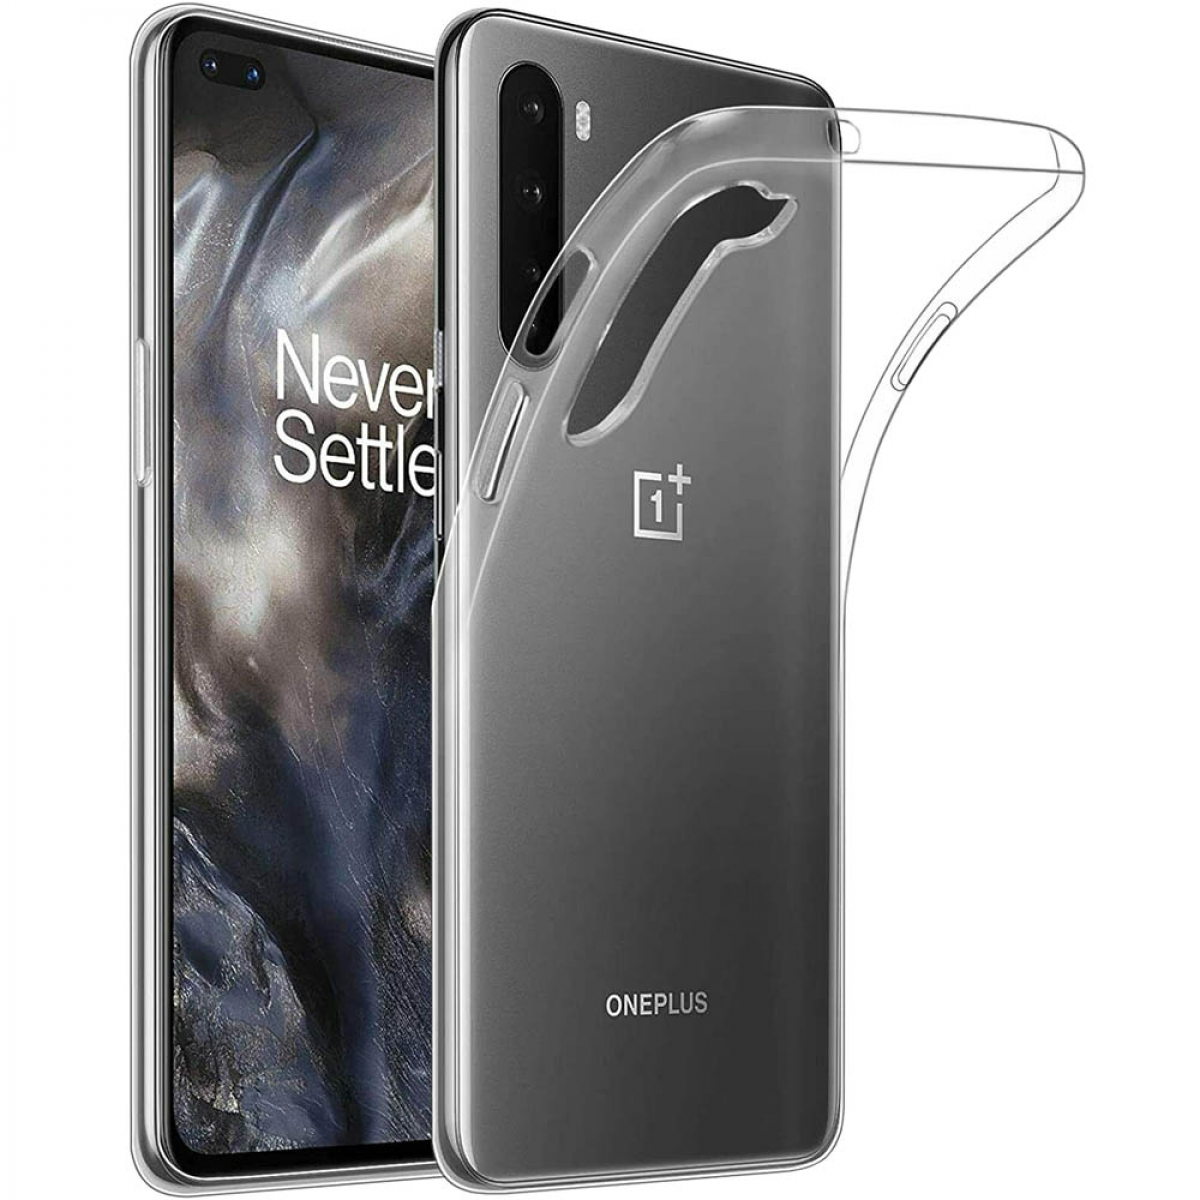 Backcover, Nord, Transparent OnePlus, CA4, CASEONLINE